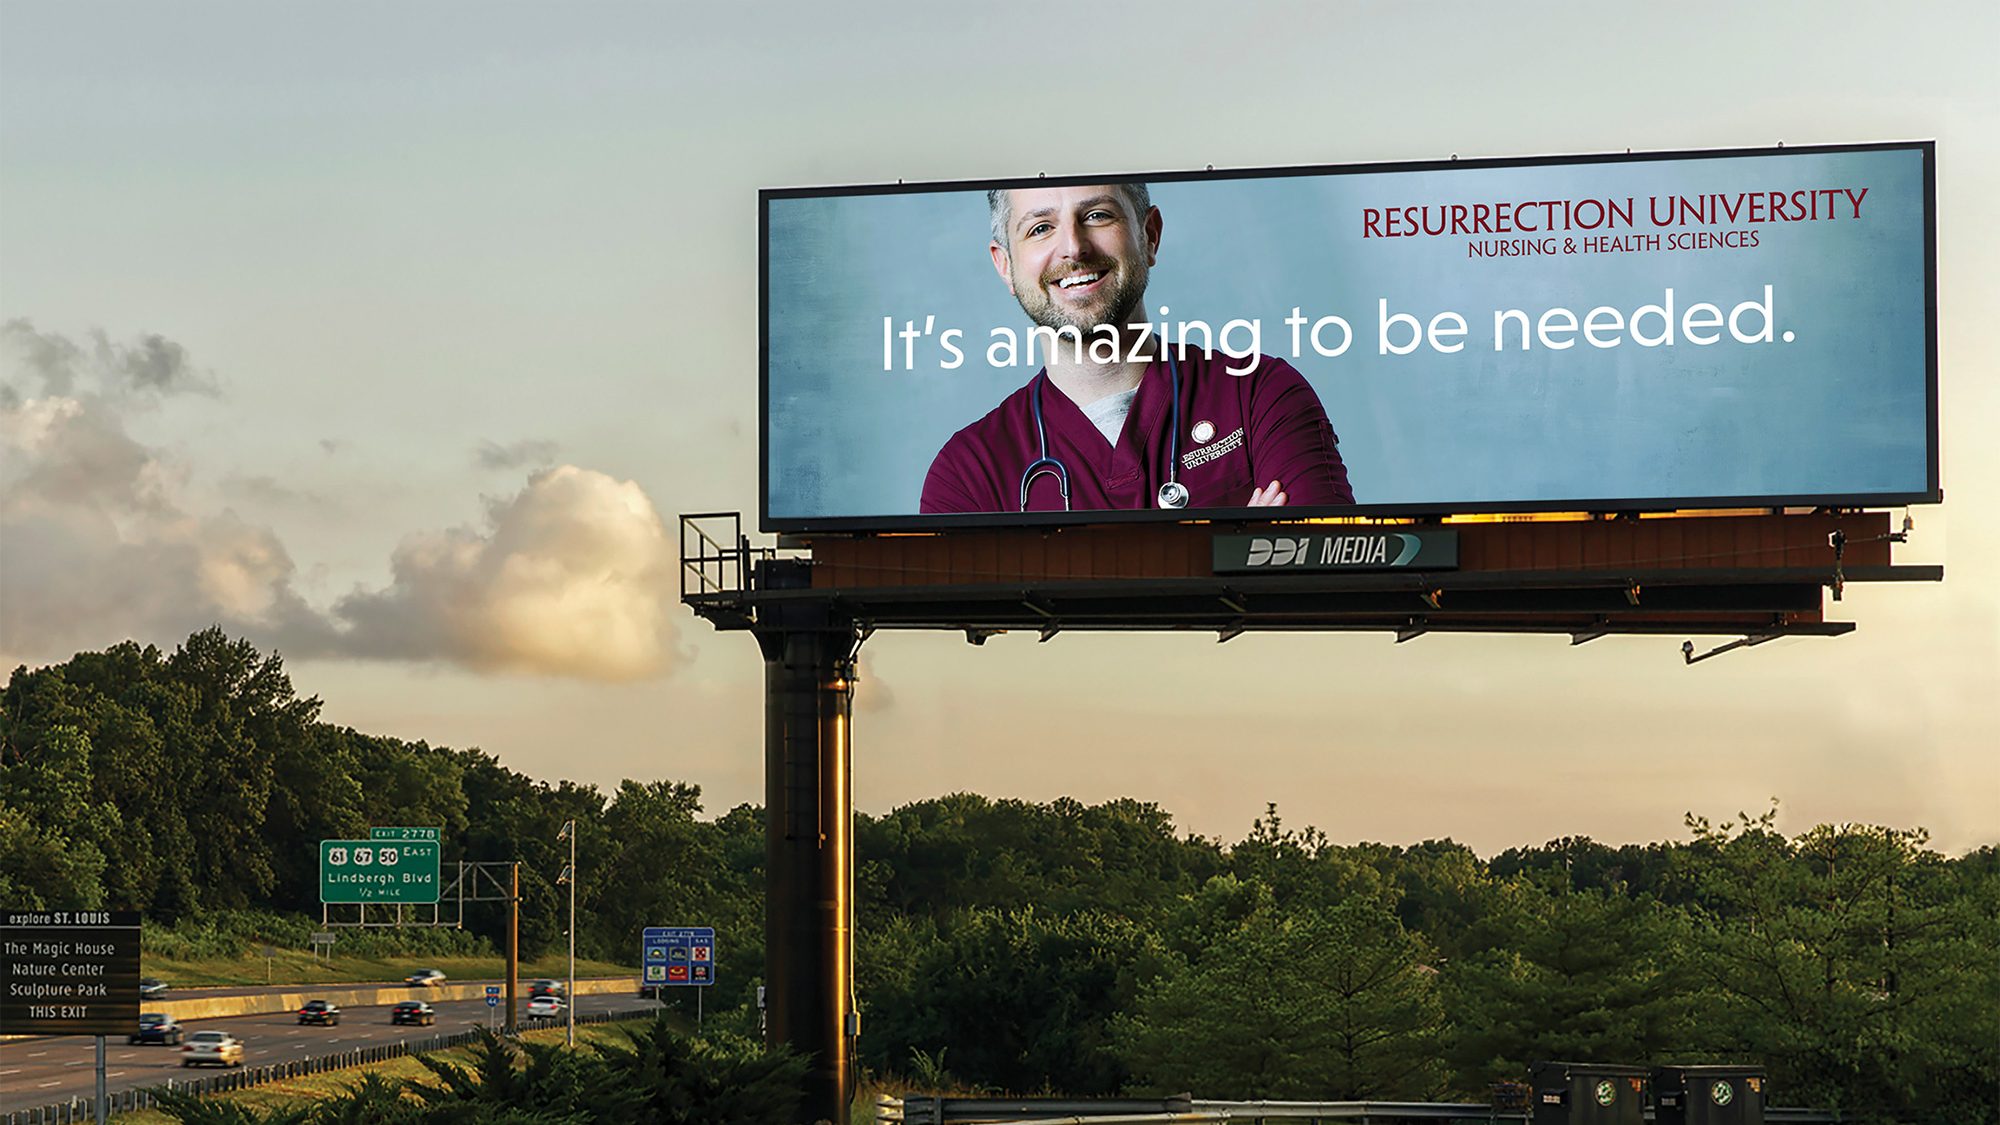 Billboard showing "It's amazing to be needed" creative; subject is a white man in red scrubs.